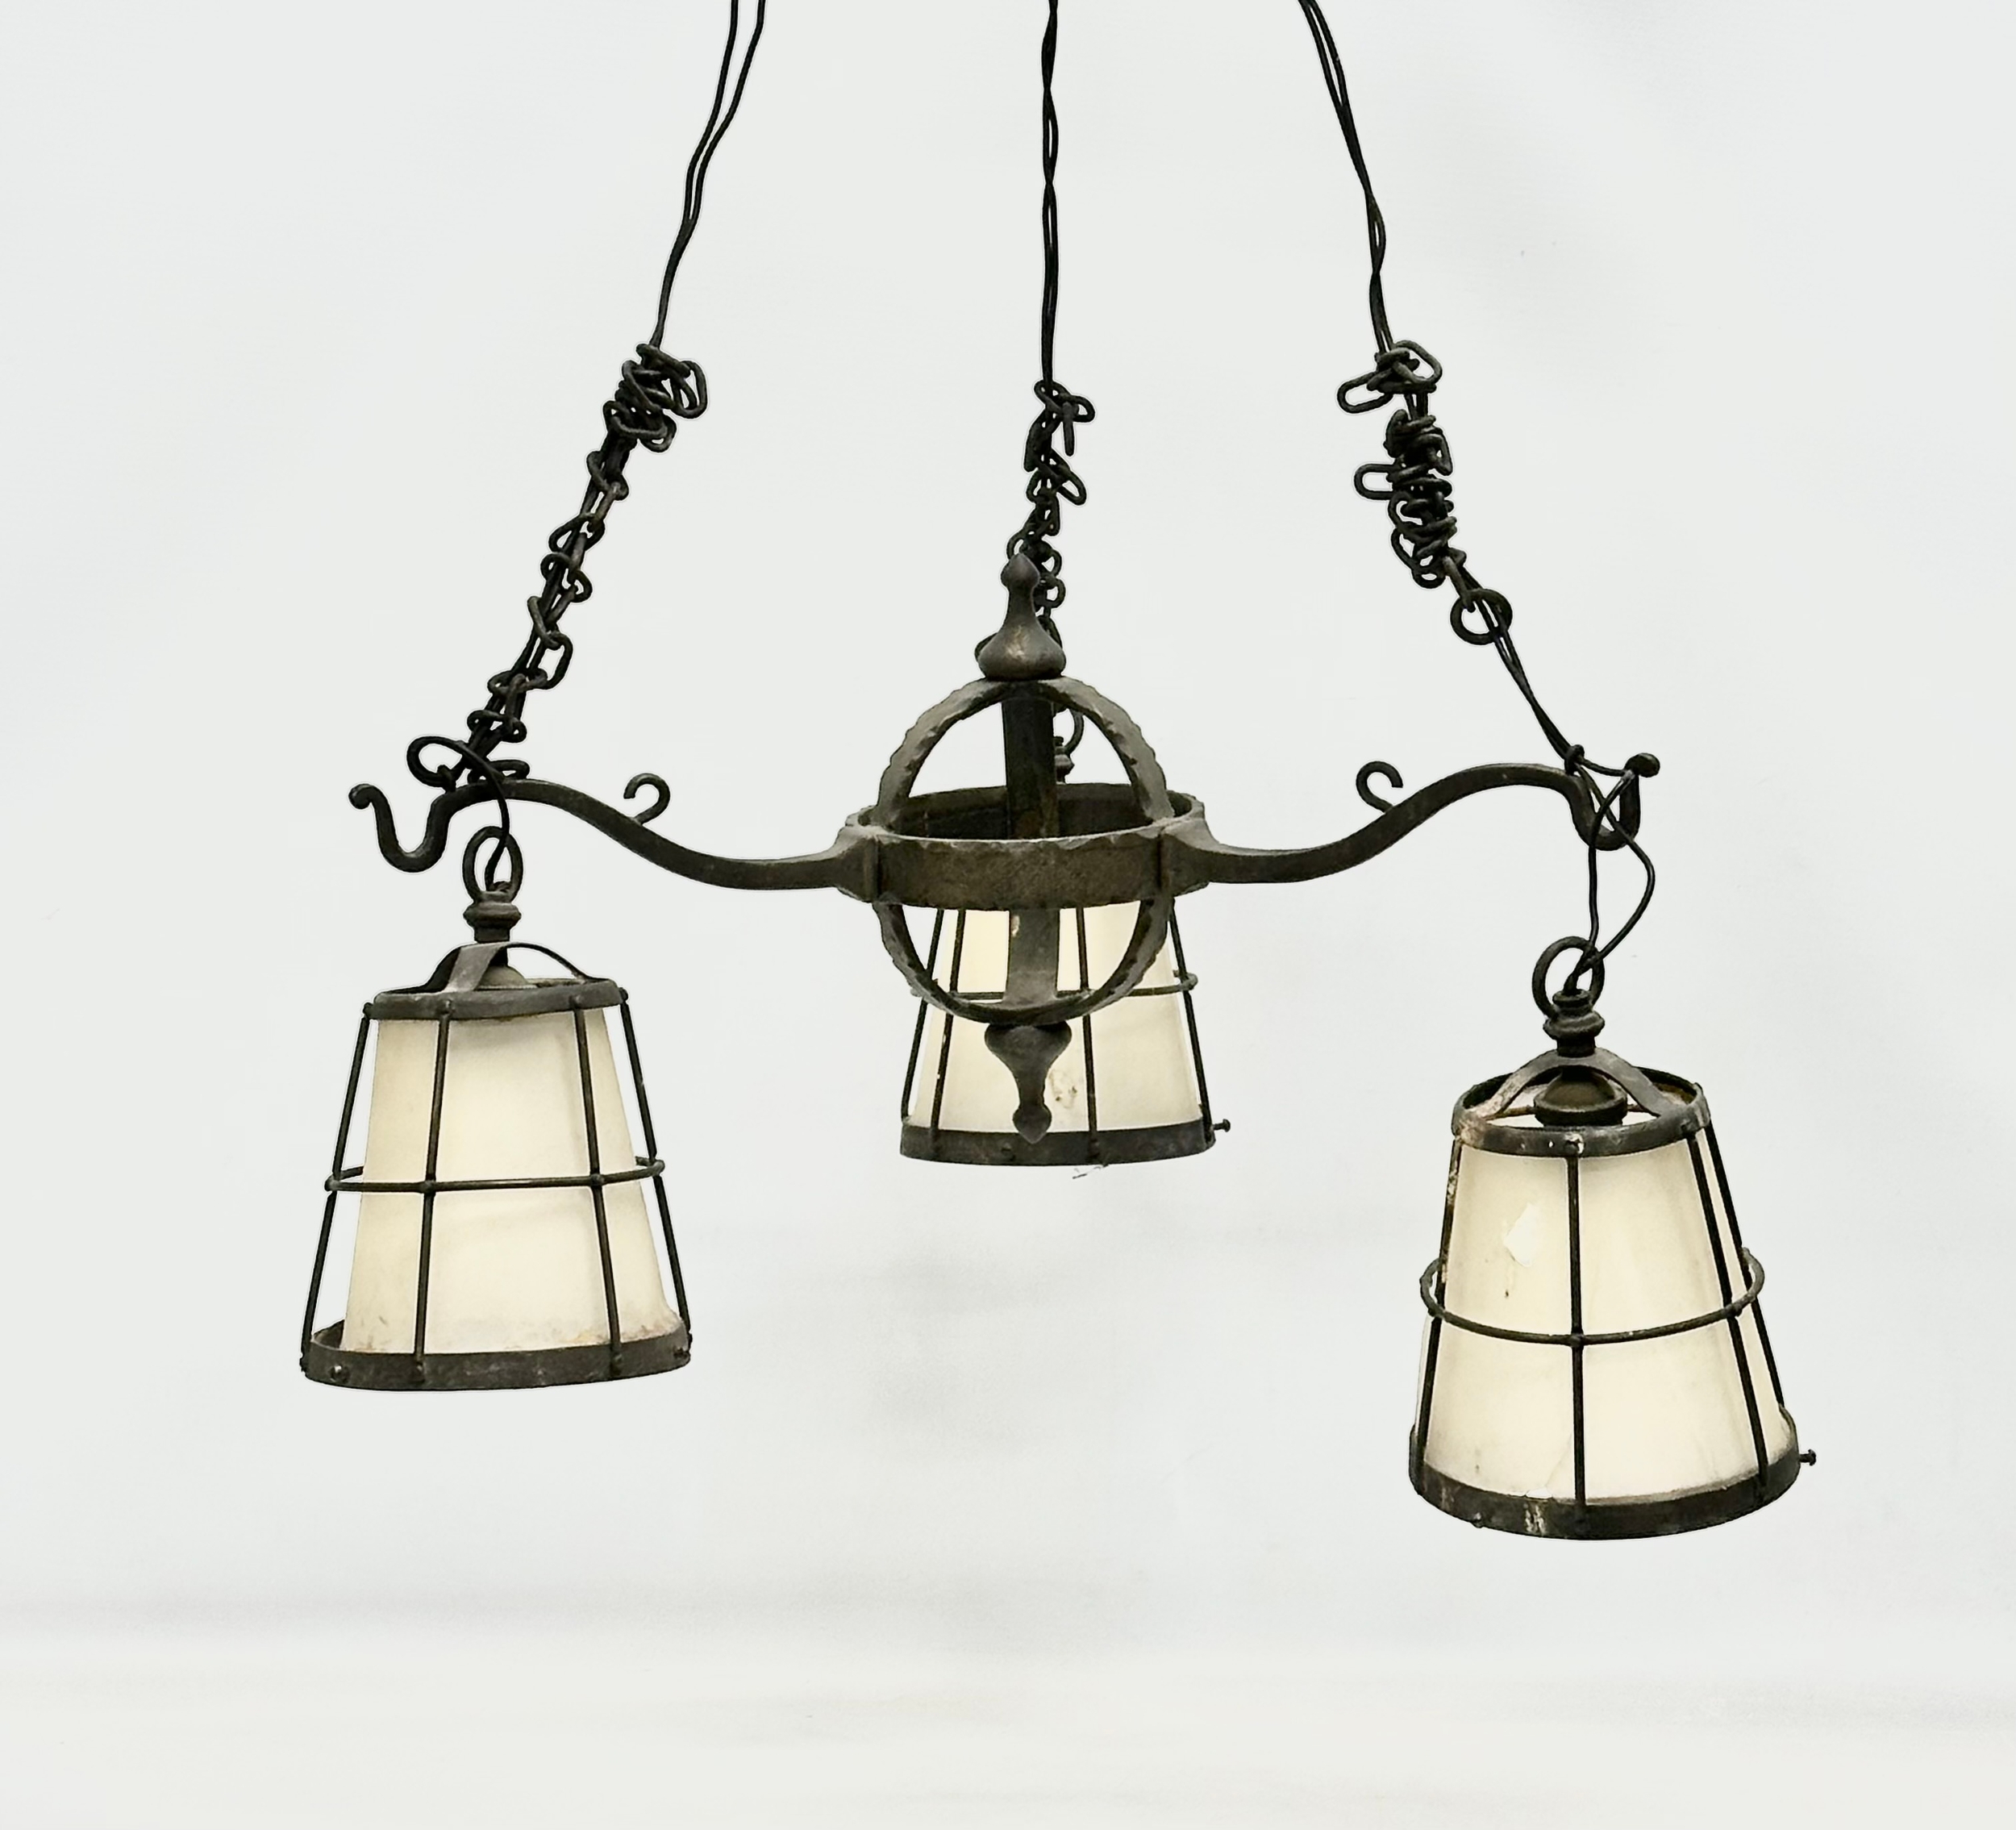 An early 20th century Arts & Crafts Wrought Iron chandelier.